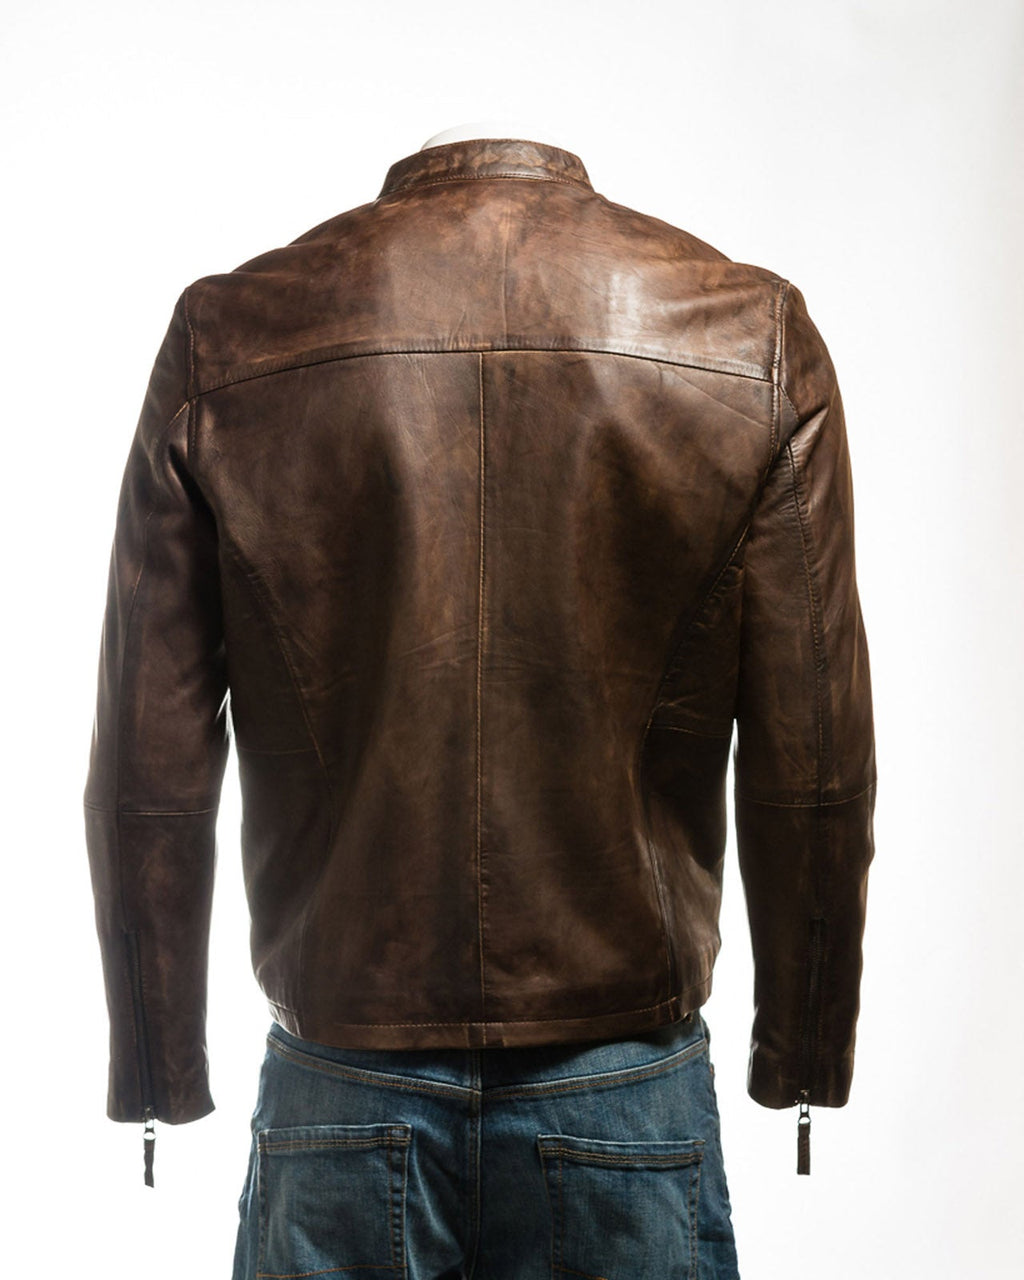 Men's Antique Brown Simple Collarless Zipped Leather Jacket: Mario